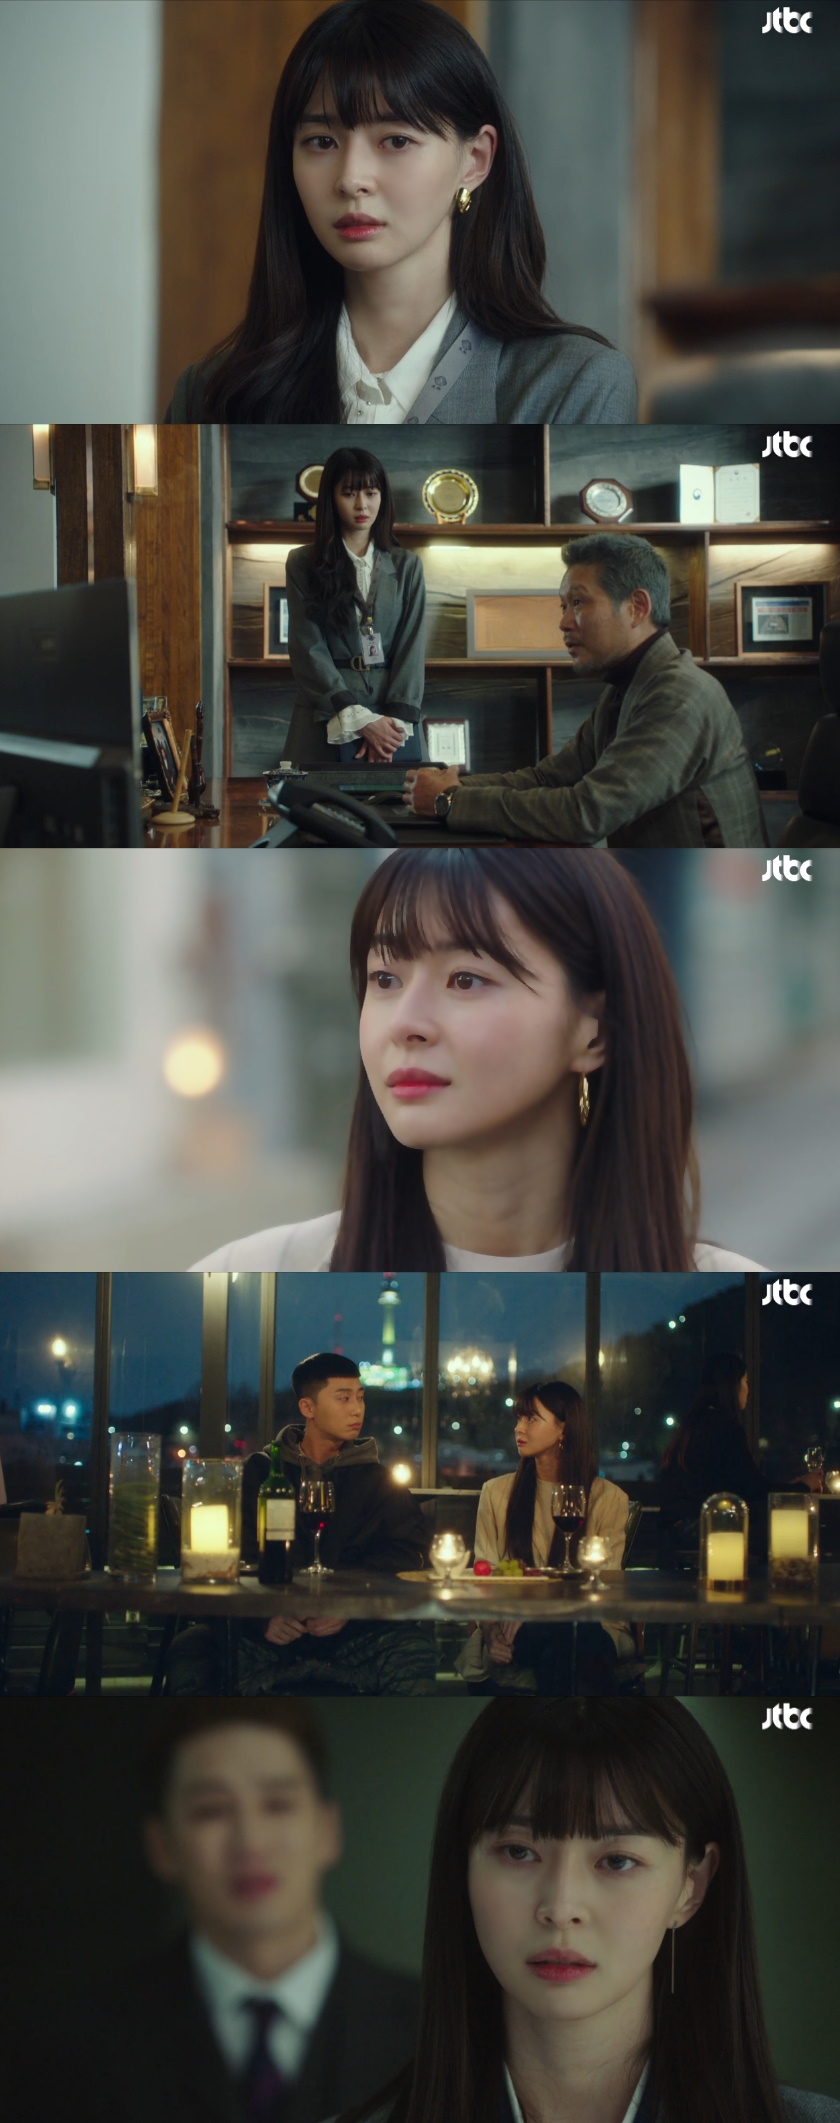 The aura and smoke potentiary of Itaewon Klath Kwon Nara burst.Park Seo-joon, Yoo Jae-myung, and An-hyun, who caught the fate of the three men properly, she was a presence with the charm of a super-crash cider.In addition, Kwon Nara presented catharsis to the room with a clear temperature difference from sweet First Love to cold beauty who poured out anger and vitriolic.Kwon Nara showed off his presence in the 9th episode of JTBCs Itaewon Klath, which aired on the 28th, from his unhinged appearance on the love confessions of Park Seo-joon, to his anger at The Fountainhead (anbo-hyun), with a perfect hot-blooded experience of Oh Soo-ahs changing emotional lines.Oh Soo-ah took the hilt in earnest: Park, Chairman Jang Dae-hee (Yoo Jae-myung), and Chang, who took the initiative in their relationship with The Fountainhead.Oh Soo-ah found out that Chairman Chang followed director Kang Min-jung (Kim Hye-eun); it was Chairman Baro Chang who caught Oh Soo-ah trying to leave the chairmans office.He then revealed all his inner thoughts, from trying to scout Joy-seo (Kim Dae-mi) to looking into the sweet night. Oh Soo-ah drew attention with a confused expression.Of these, Oh Soo-ah met with Park Roy and received Confessions.Oh Soo-ah wondered what would have happened if I hadnt been a janga person, and Roy calmly said, I like it, and the conversations were fair to him.He said, You always decide between us, and revealed that he was Oh Soo-ah hope.Oh Soo-ah smiled brightly and joked that I like rich people, and Roy responded that I am a landlord, and he held honey jam with the charm of sweet First Love romance.Kwon Nara raised the index of excitement in the room with a solid performance that completely melted Oh Soo-ahs psychology, which felt a complex feeling of clutter, surprise and relief in the Confessions of the Roy.Oh Soo-ahs thrilling cider moment, which was directed at The Fountainhead, which had killed Park Sung-yeol (Son Hyun-joo), completely fascinated the house theater.Oh Soo-ah was angry at The Fountainhead, who hovered around him and craved affection, saying, What confidence do you have?To the Fountainhead, who excuses the past as an accident, Oh Soo-ah said, After that? After the accident.I hate you so much, he cried coldly, and I hate you for not reporting, for anyone elses crime, for that matter.Oh Soo-ah said he liked Roy, not him, and once again added to the girl crush cider by putting an arrow in the heart of the Fountainhead.Kwon Naras upturned performance, which explodes the aura of cold beauty with uncompromising vitriolic and creepy eyes, vertically increased immersion and made viewers hearts chewy.Kwon Naras brilliant performance, which is drawing the charm of Oh Soo-ah every time, is making a lot of fun to watch the drama Itaewon Clath with a hot acclaim.In addition, as a key figure who has won the heart of the characters who are sharply confronted, he has done more than his share and raised expectations for his performance.Meanwhile, Itaewon Klath, starring Kwon Nara, will air today at 10:50 p.m. on JTBC.iMBC  JTBC Screen Capture